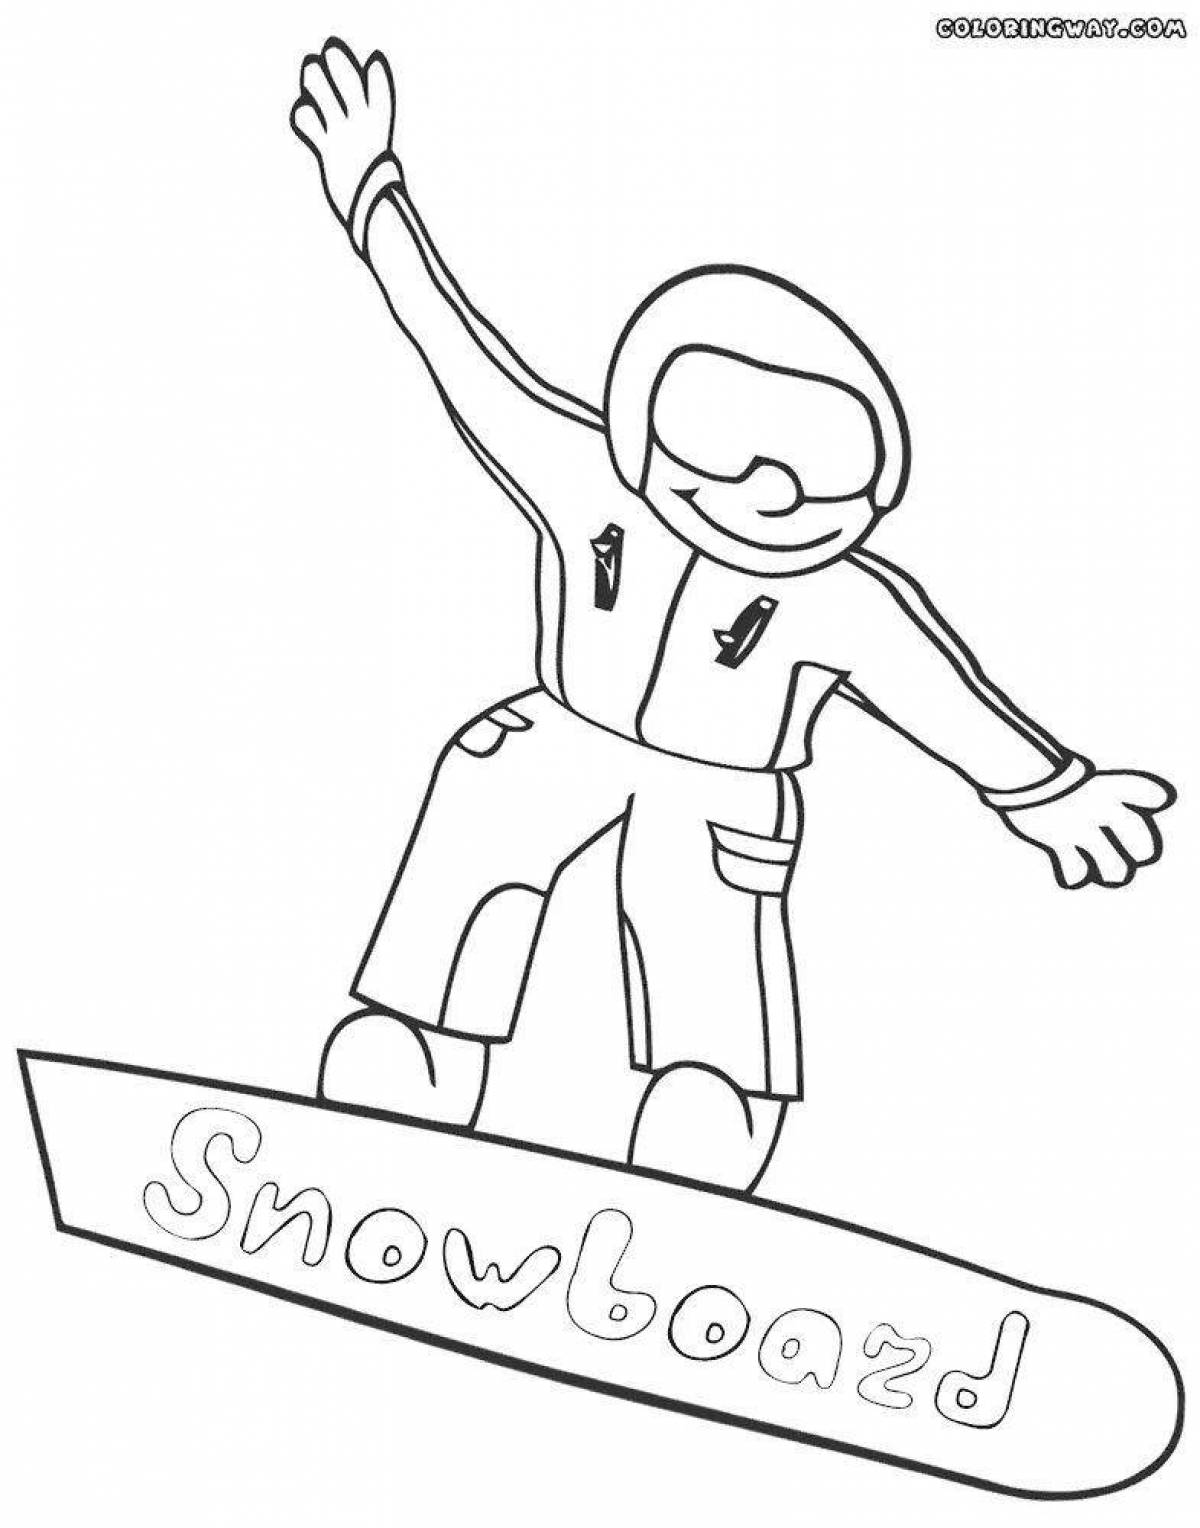 Nimble snowboarder coloring page